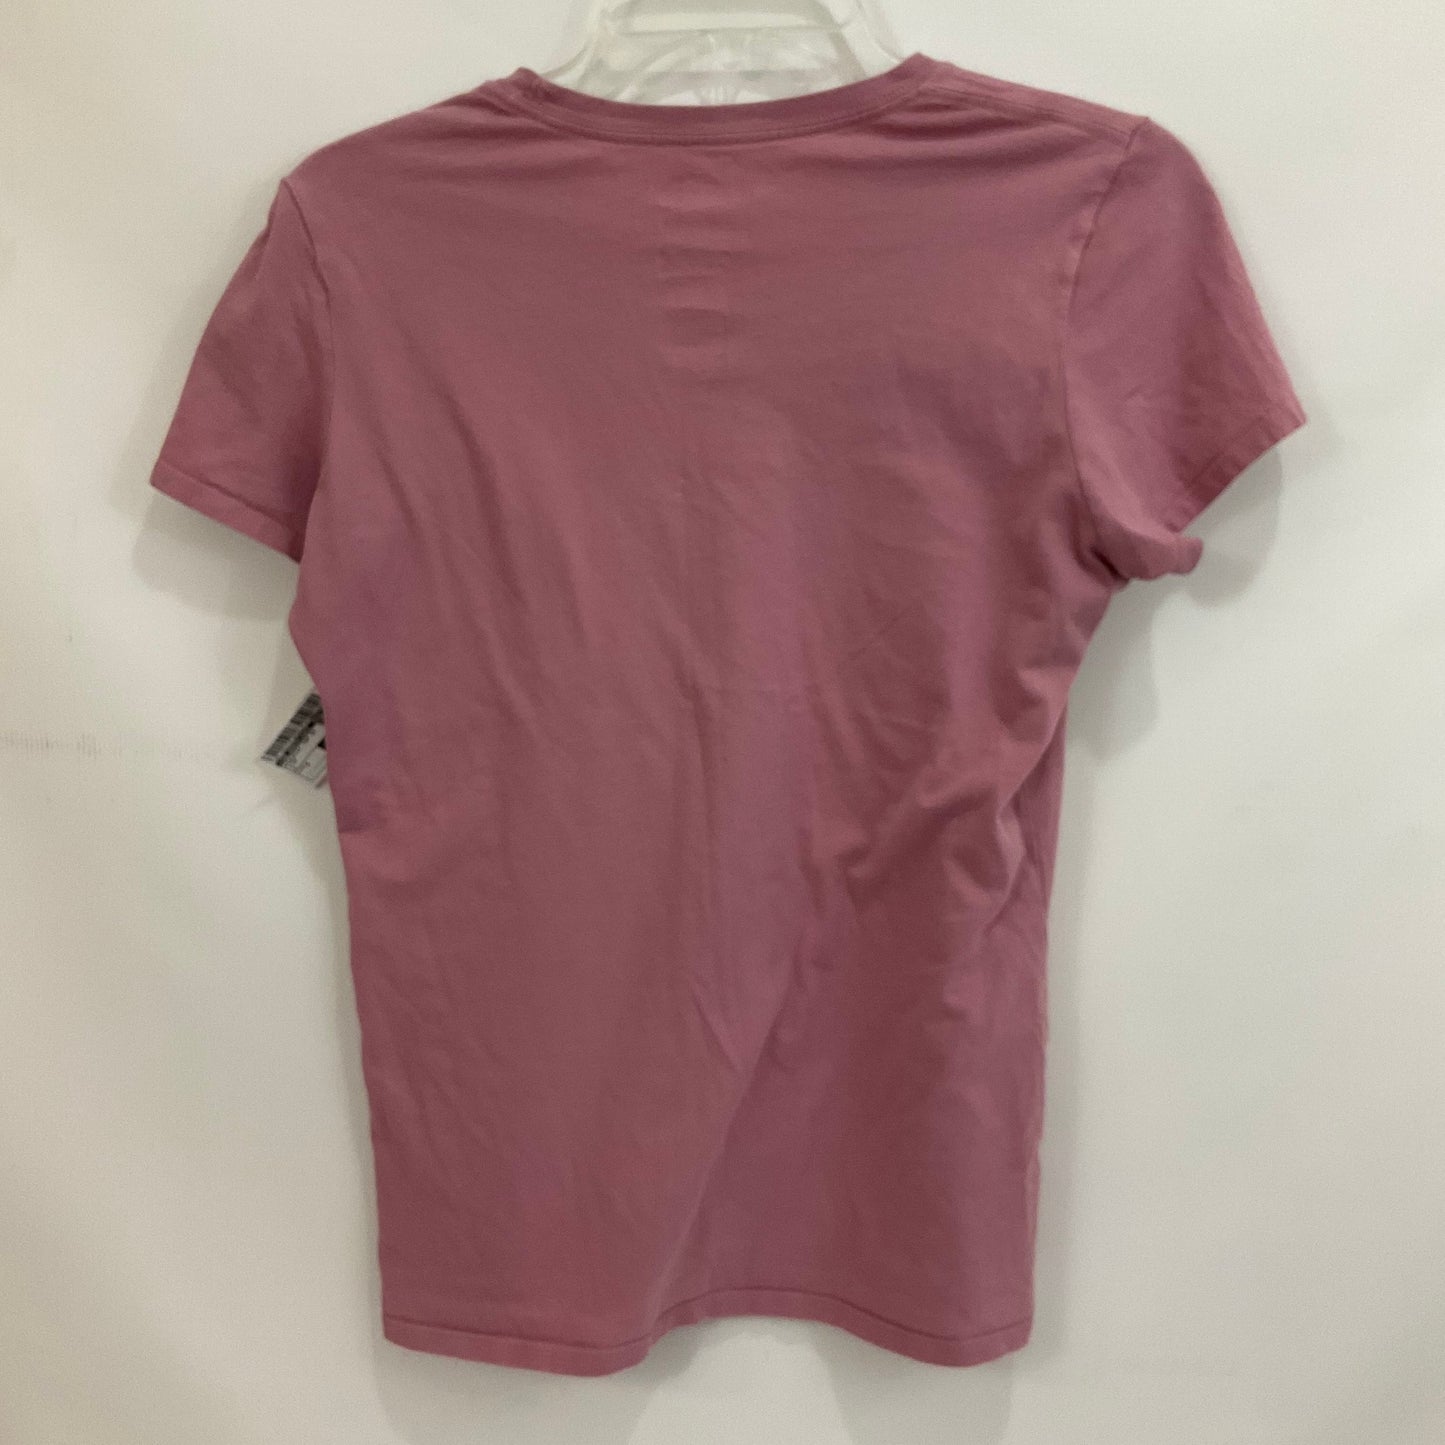 Pink Athletic Top Short Sleeve The North Face, Size S